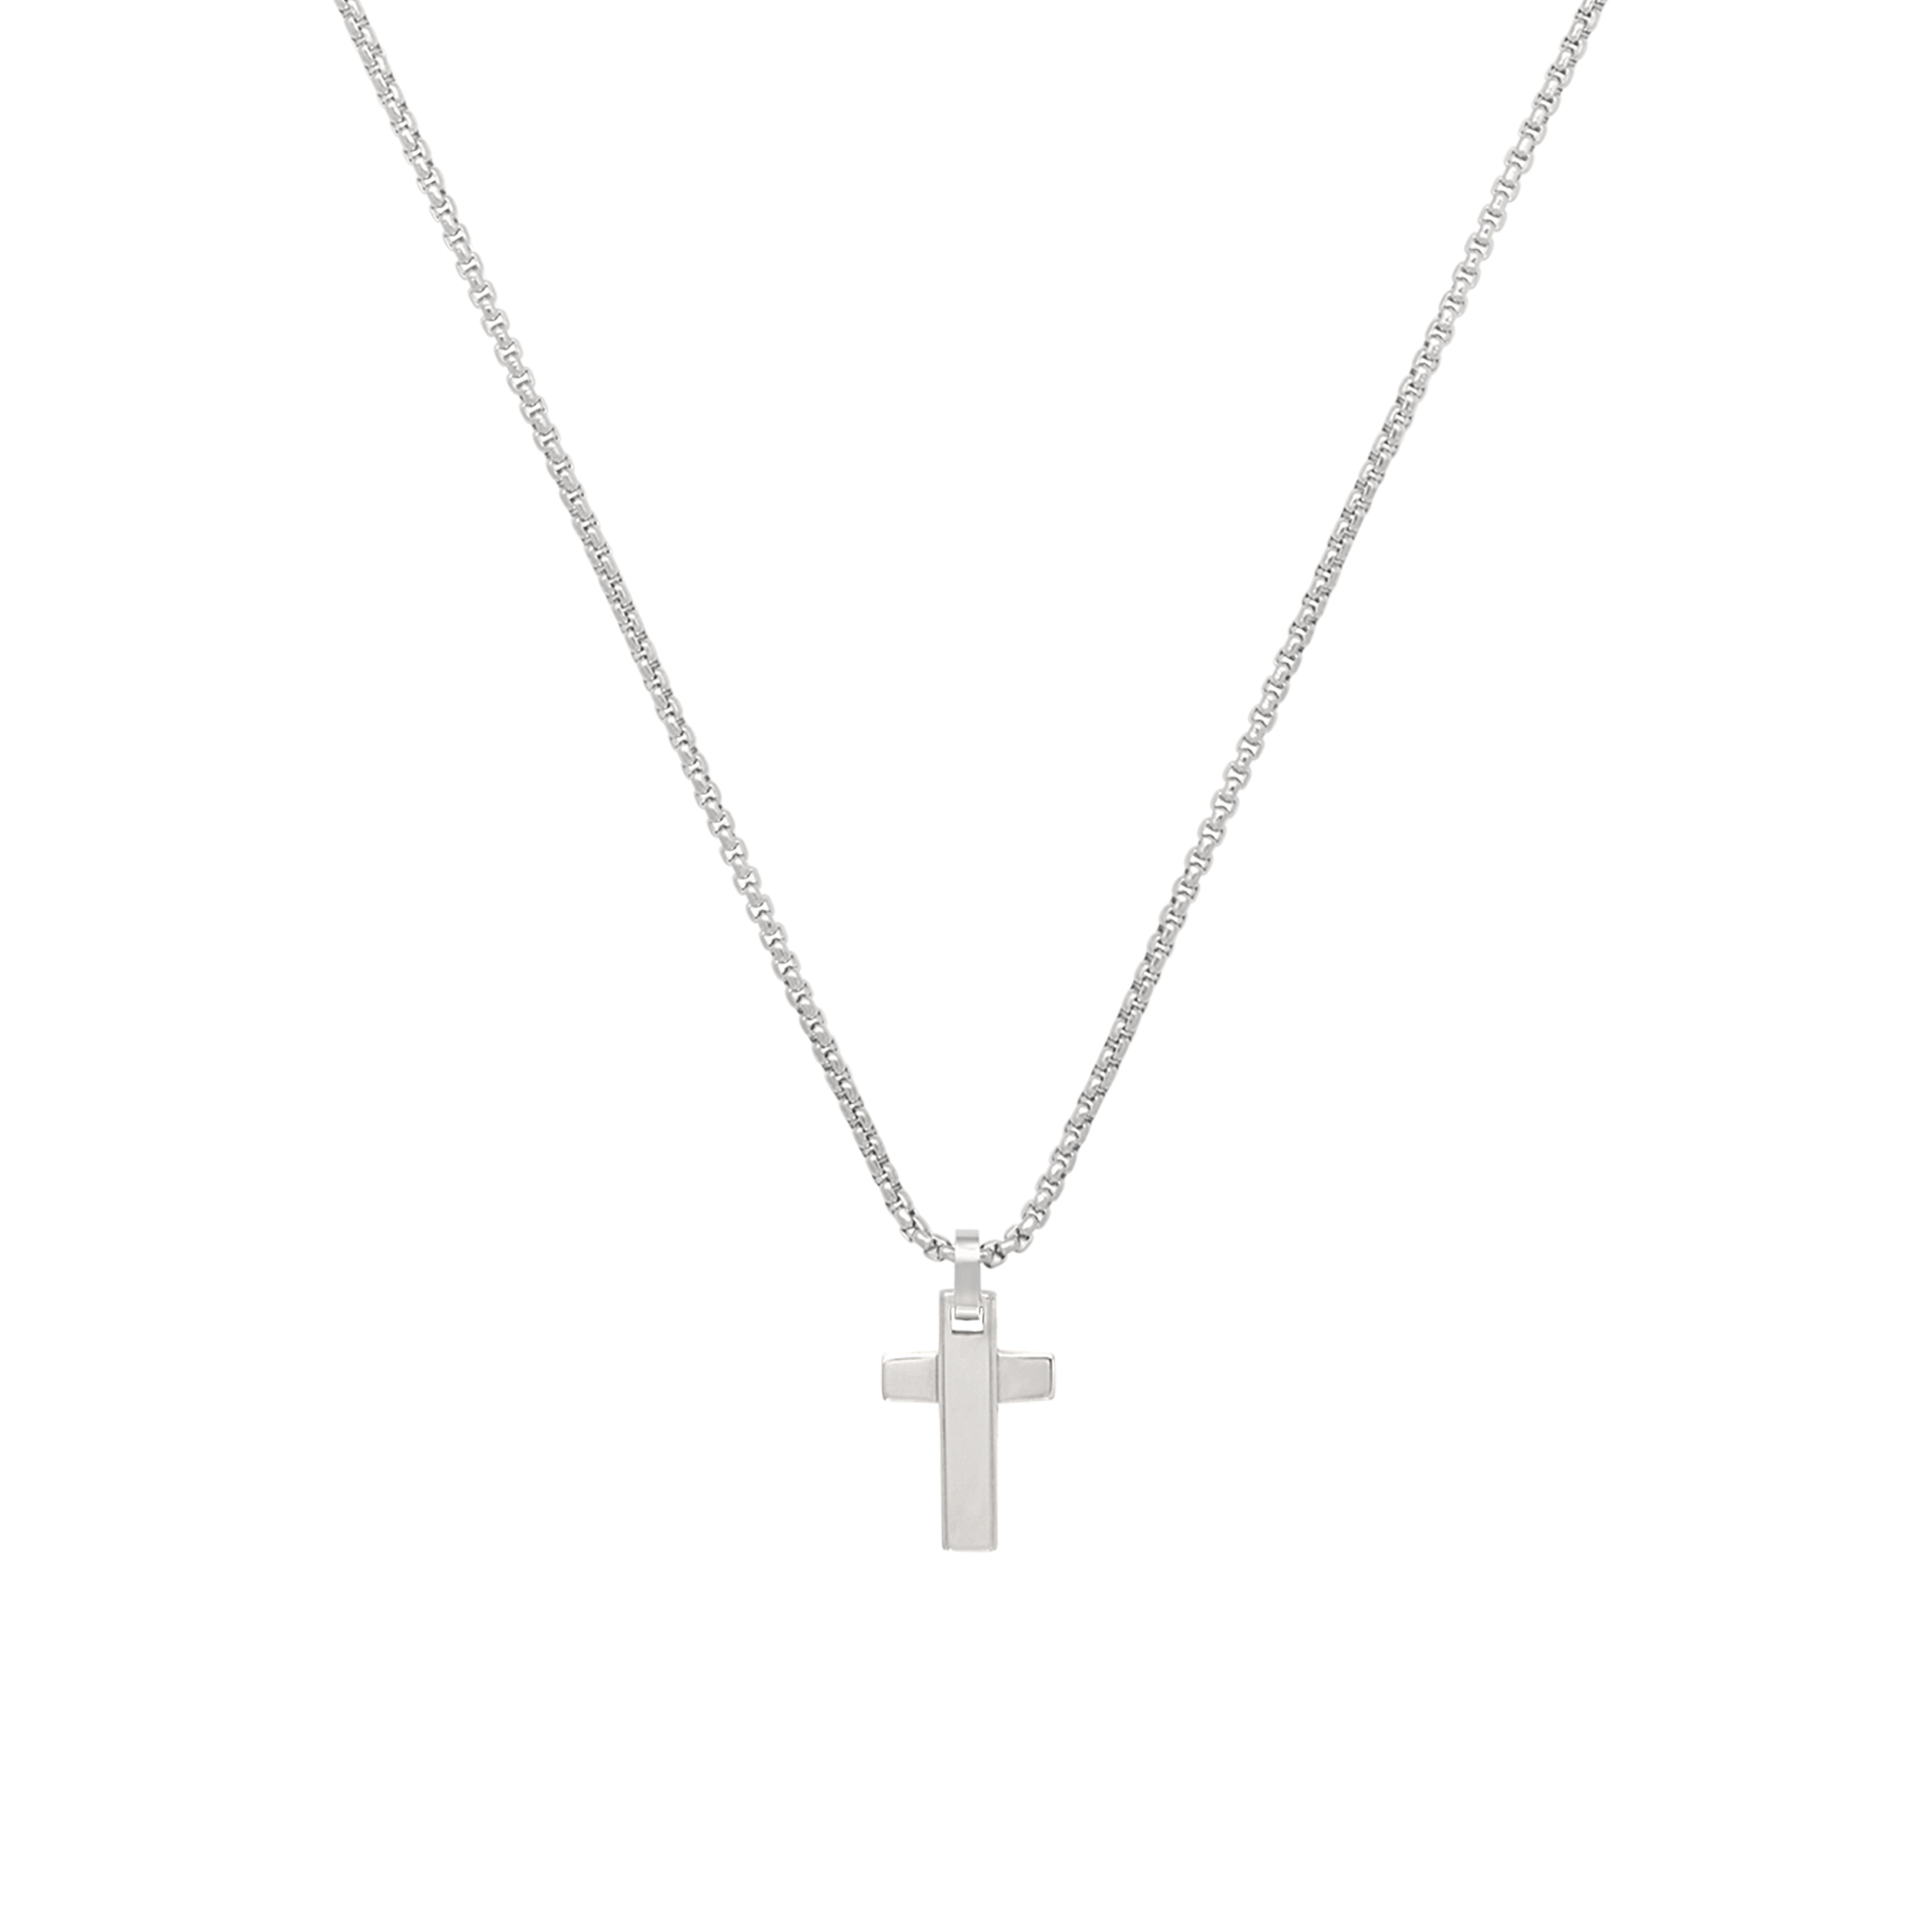 TAG AND CROSS - STAINLESS STEEL NECKLACE WITH PENDANT - 2 - TJ3228 | Breil